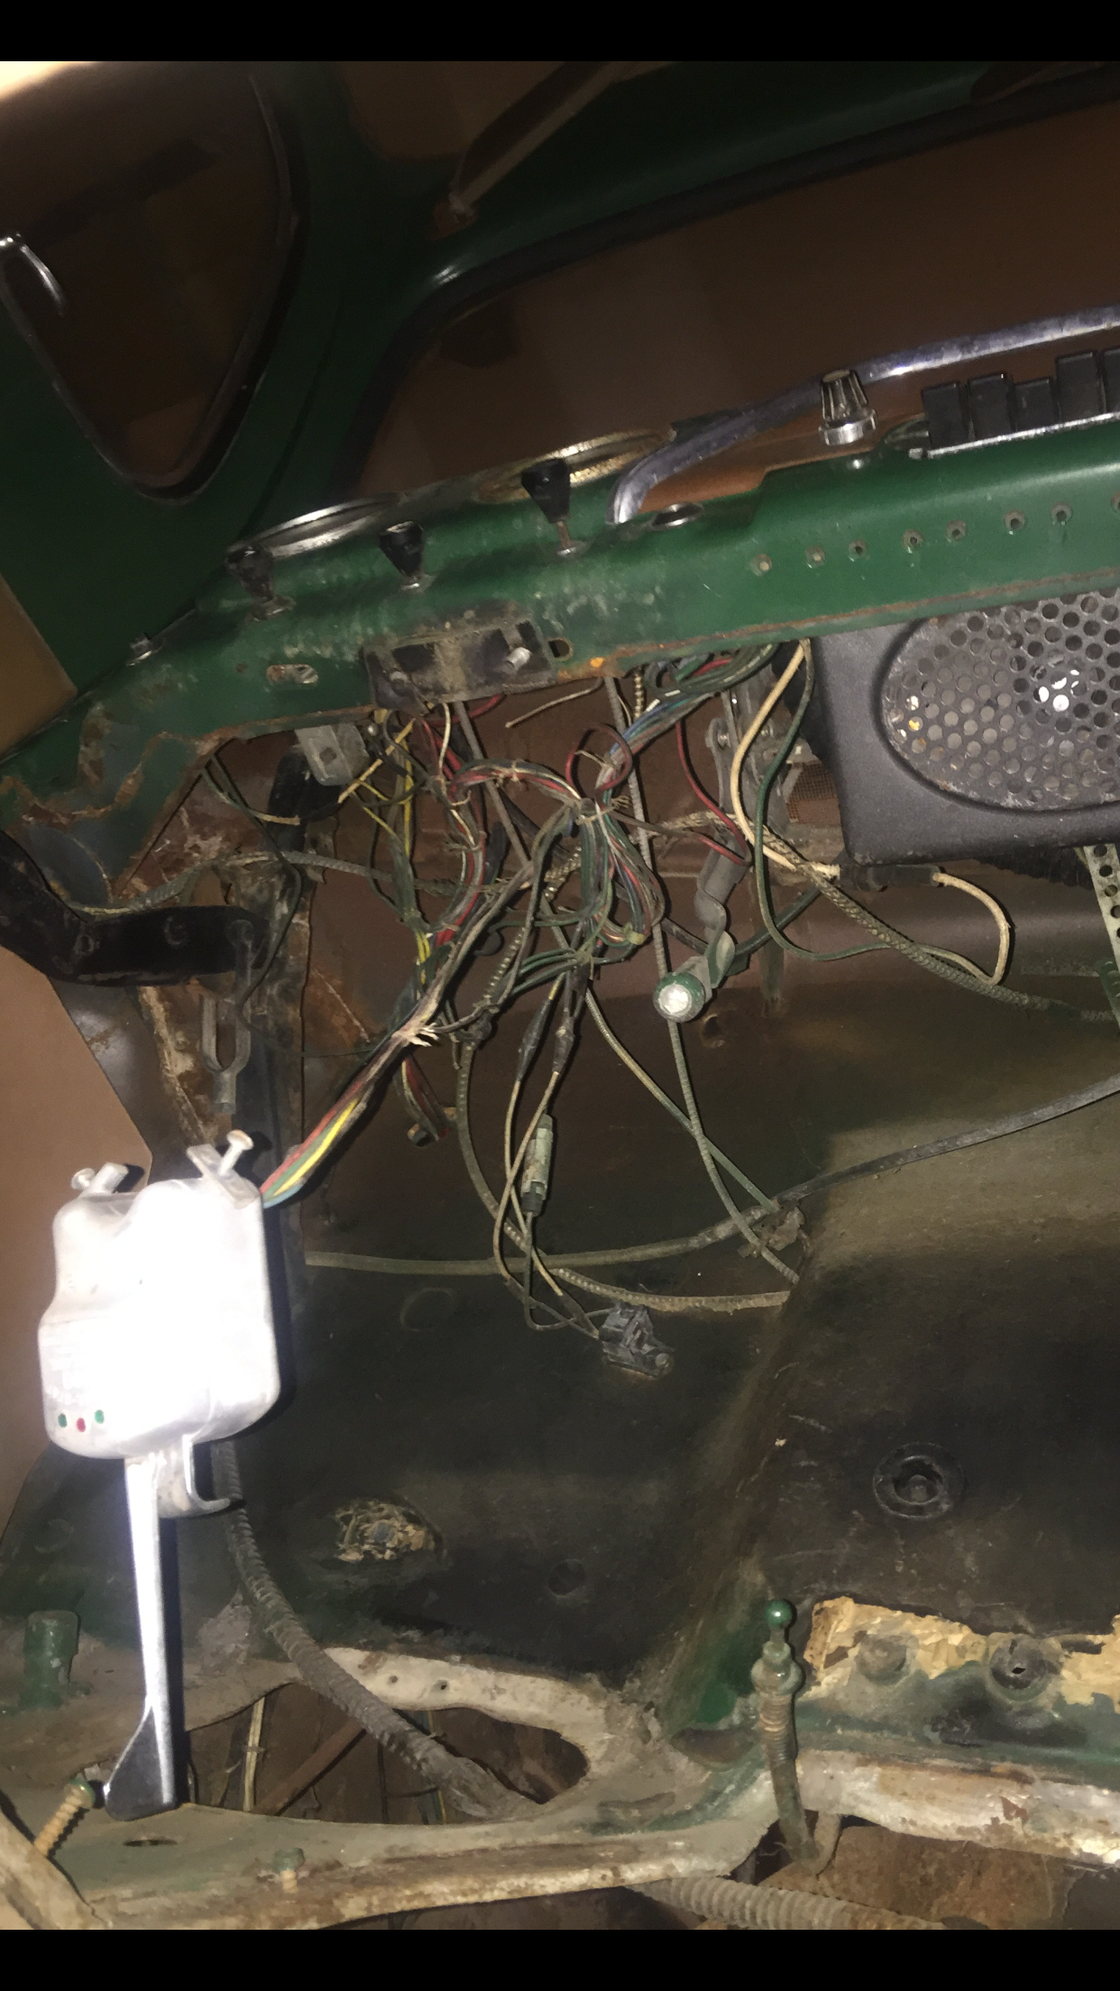 Underdash wiring 1952 F1 - Ford Truck Enthusiasts Forums